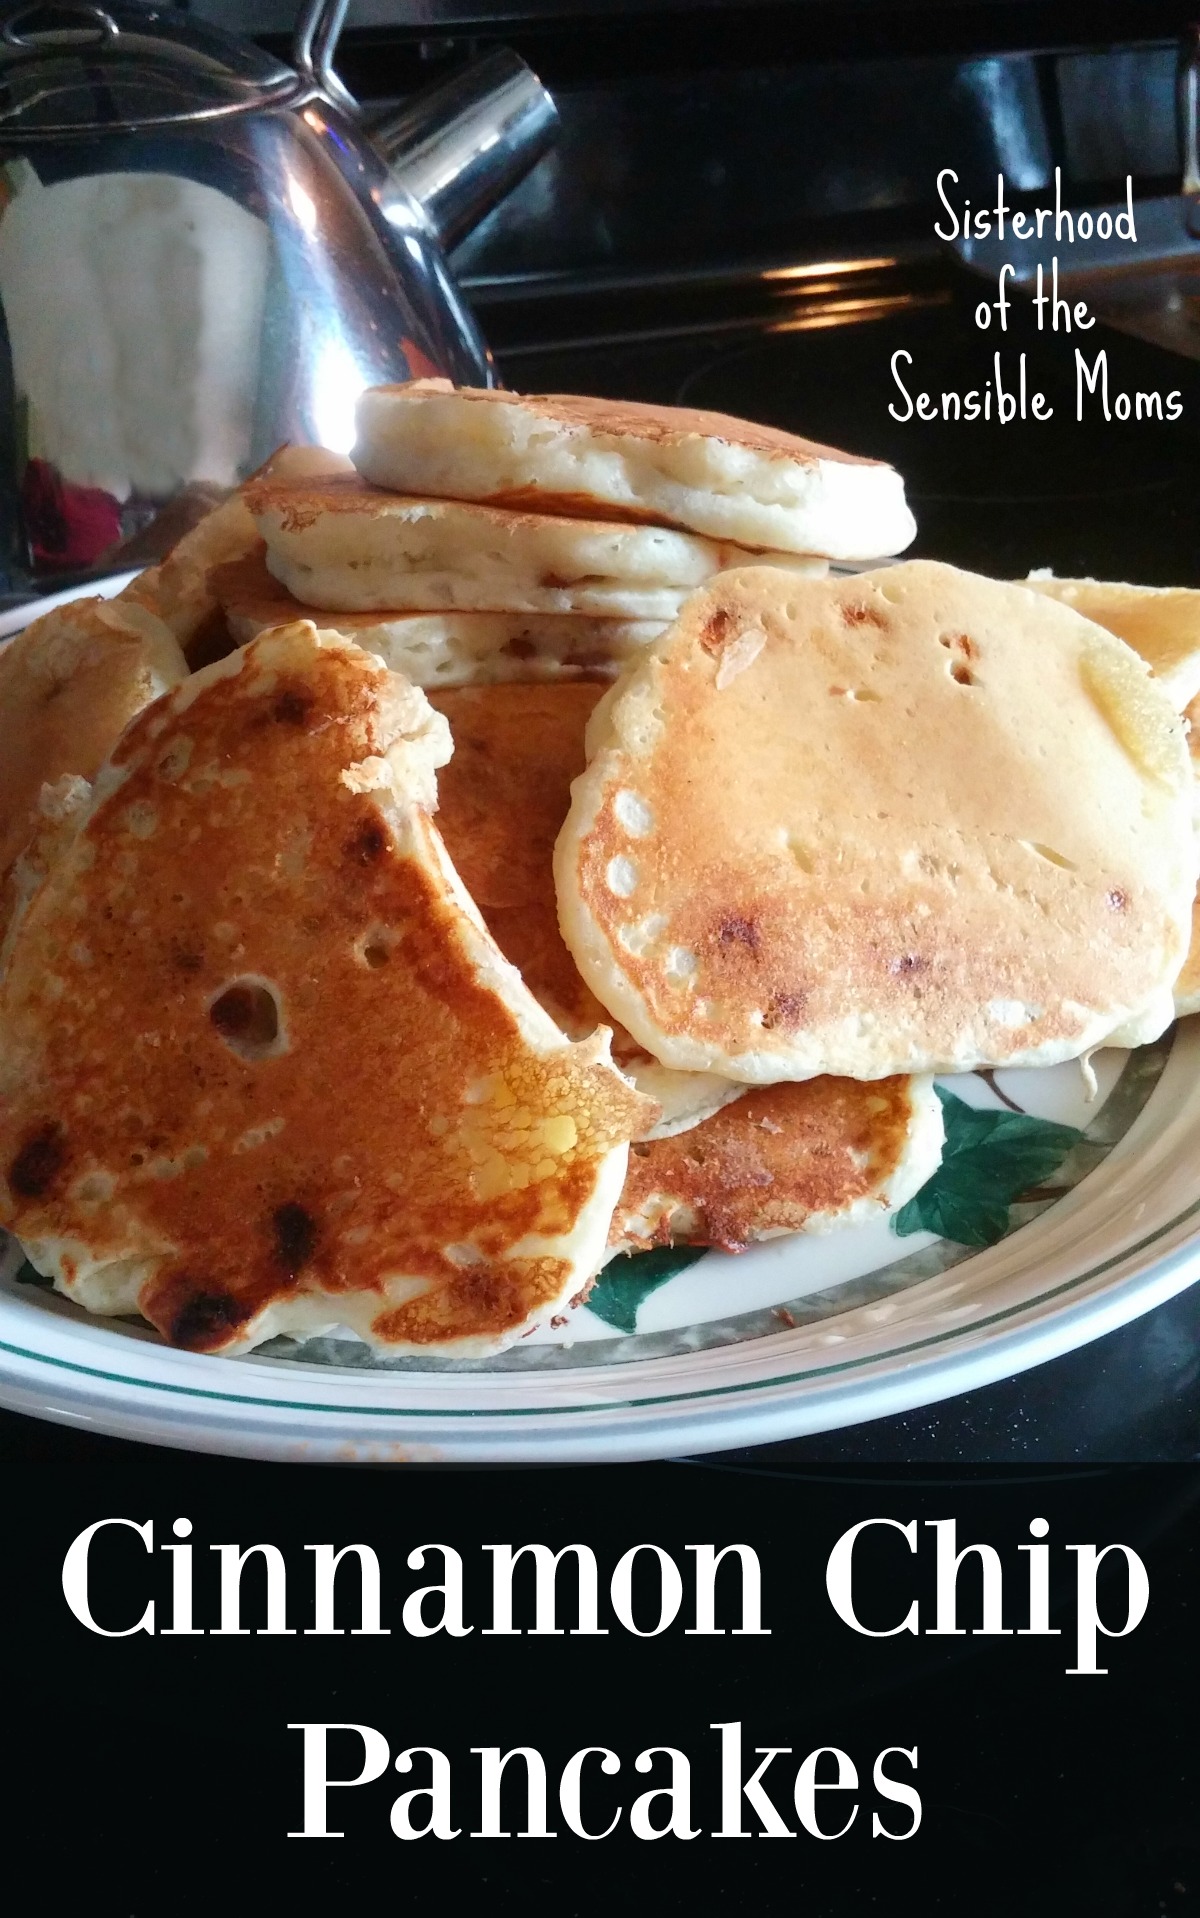 Be a hero this weekend and make these delicious Cinnamon Chip Pancakes from scratch. In fact, why not double the batch and freeze some for the week? | Breakfast Recipe | Sisterhood of the Sensible Moms